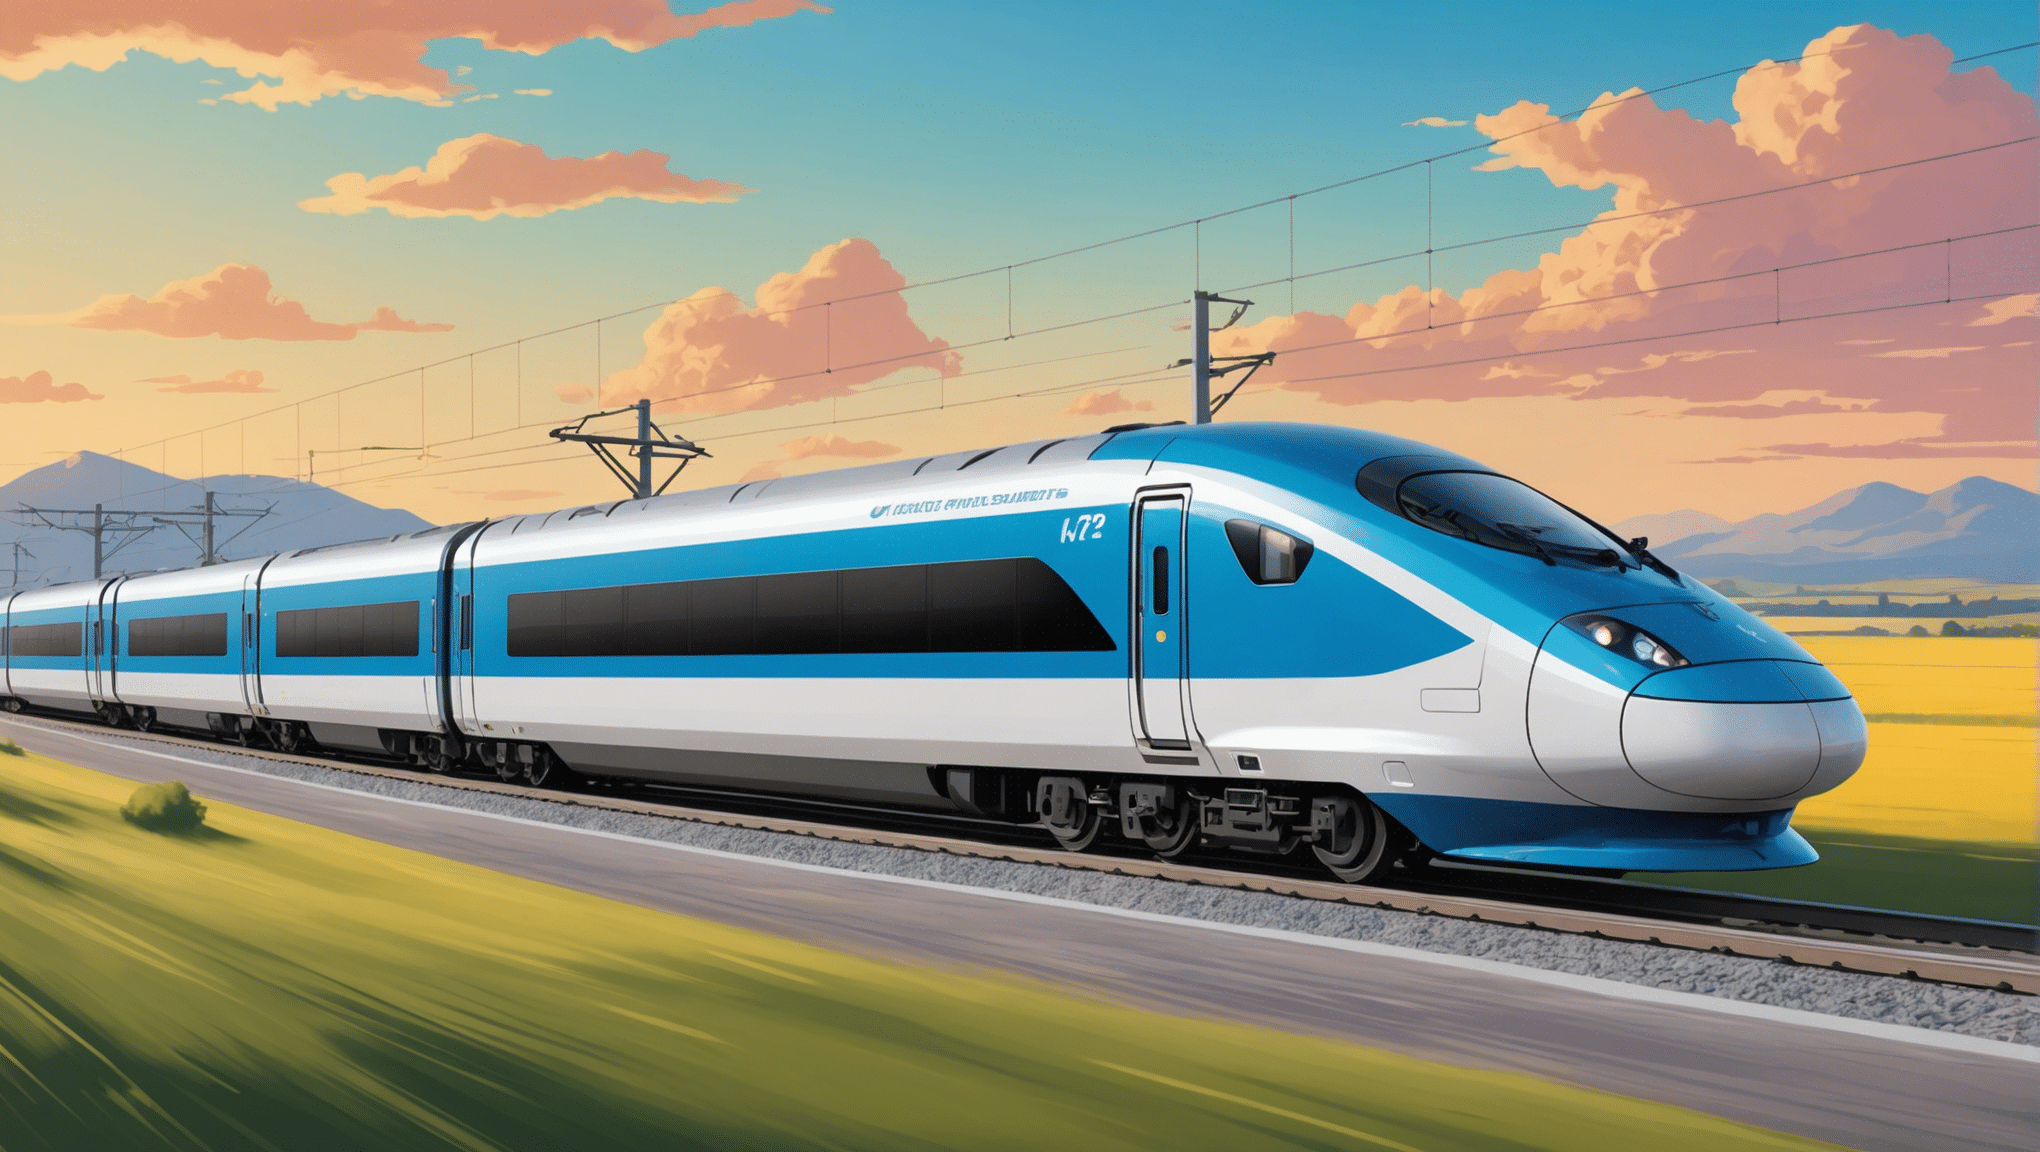 discover the essential journeys aboard high-speed trains for an unforgettable journey.